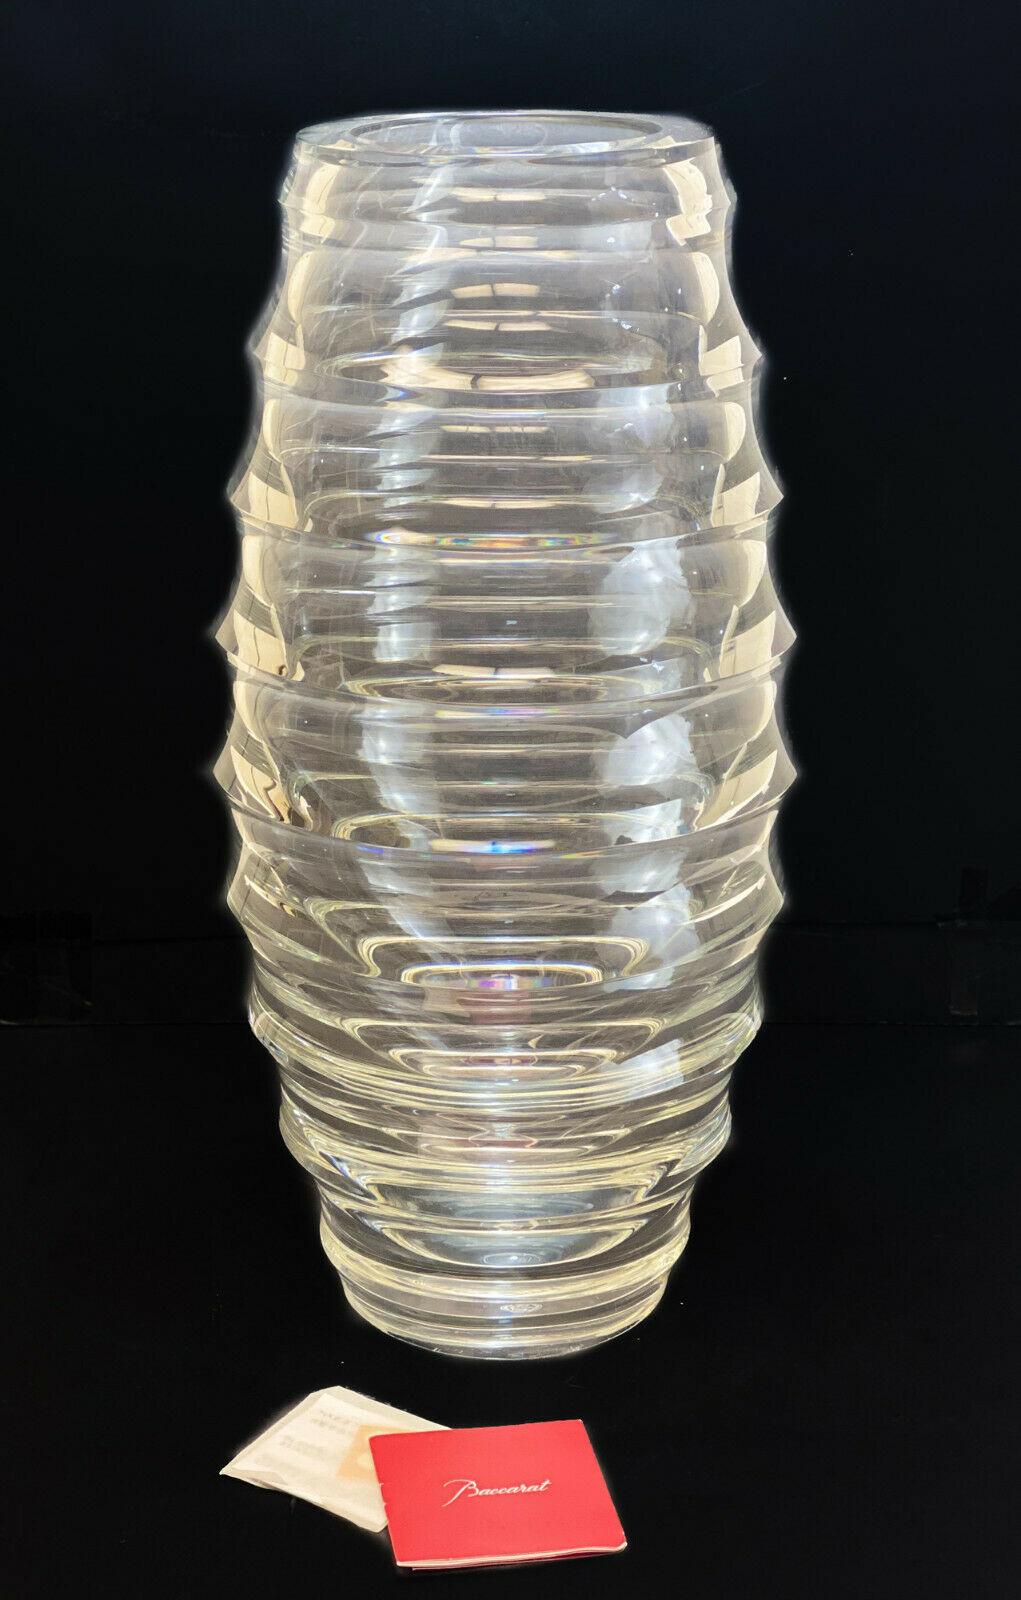 Baccarat crystal glass circumference vase by Vicente Wolf. Hive form. Signed Baccarat towards the base and an acid etched Baccarat stamp to the underside. In original box.

Weight approx., 20 lbs

Measures: Approx., vase: 8.75 inches diameter x